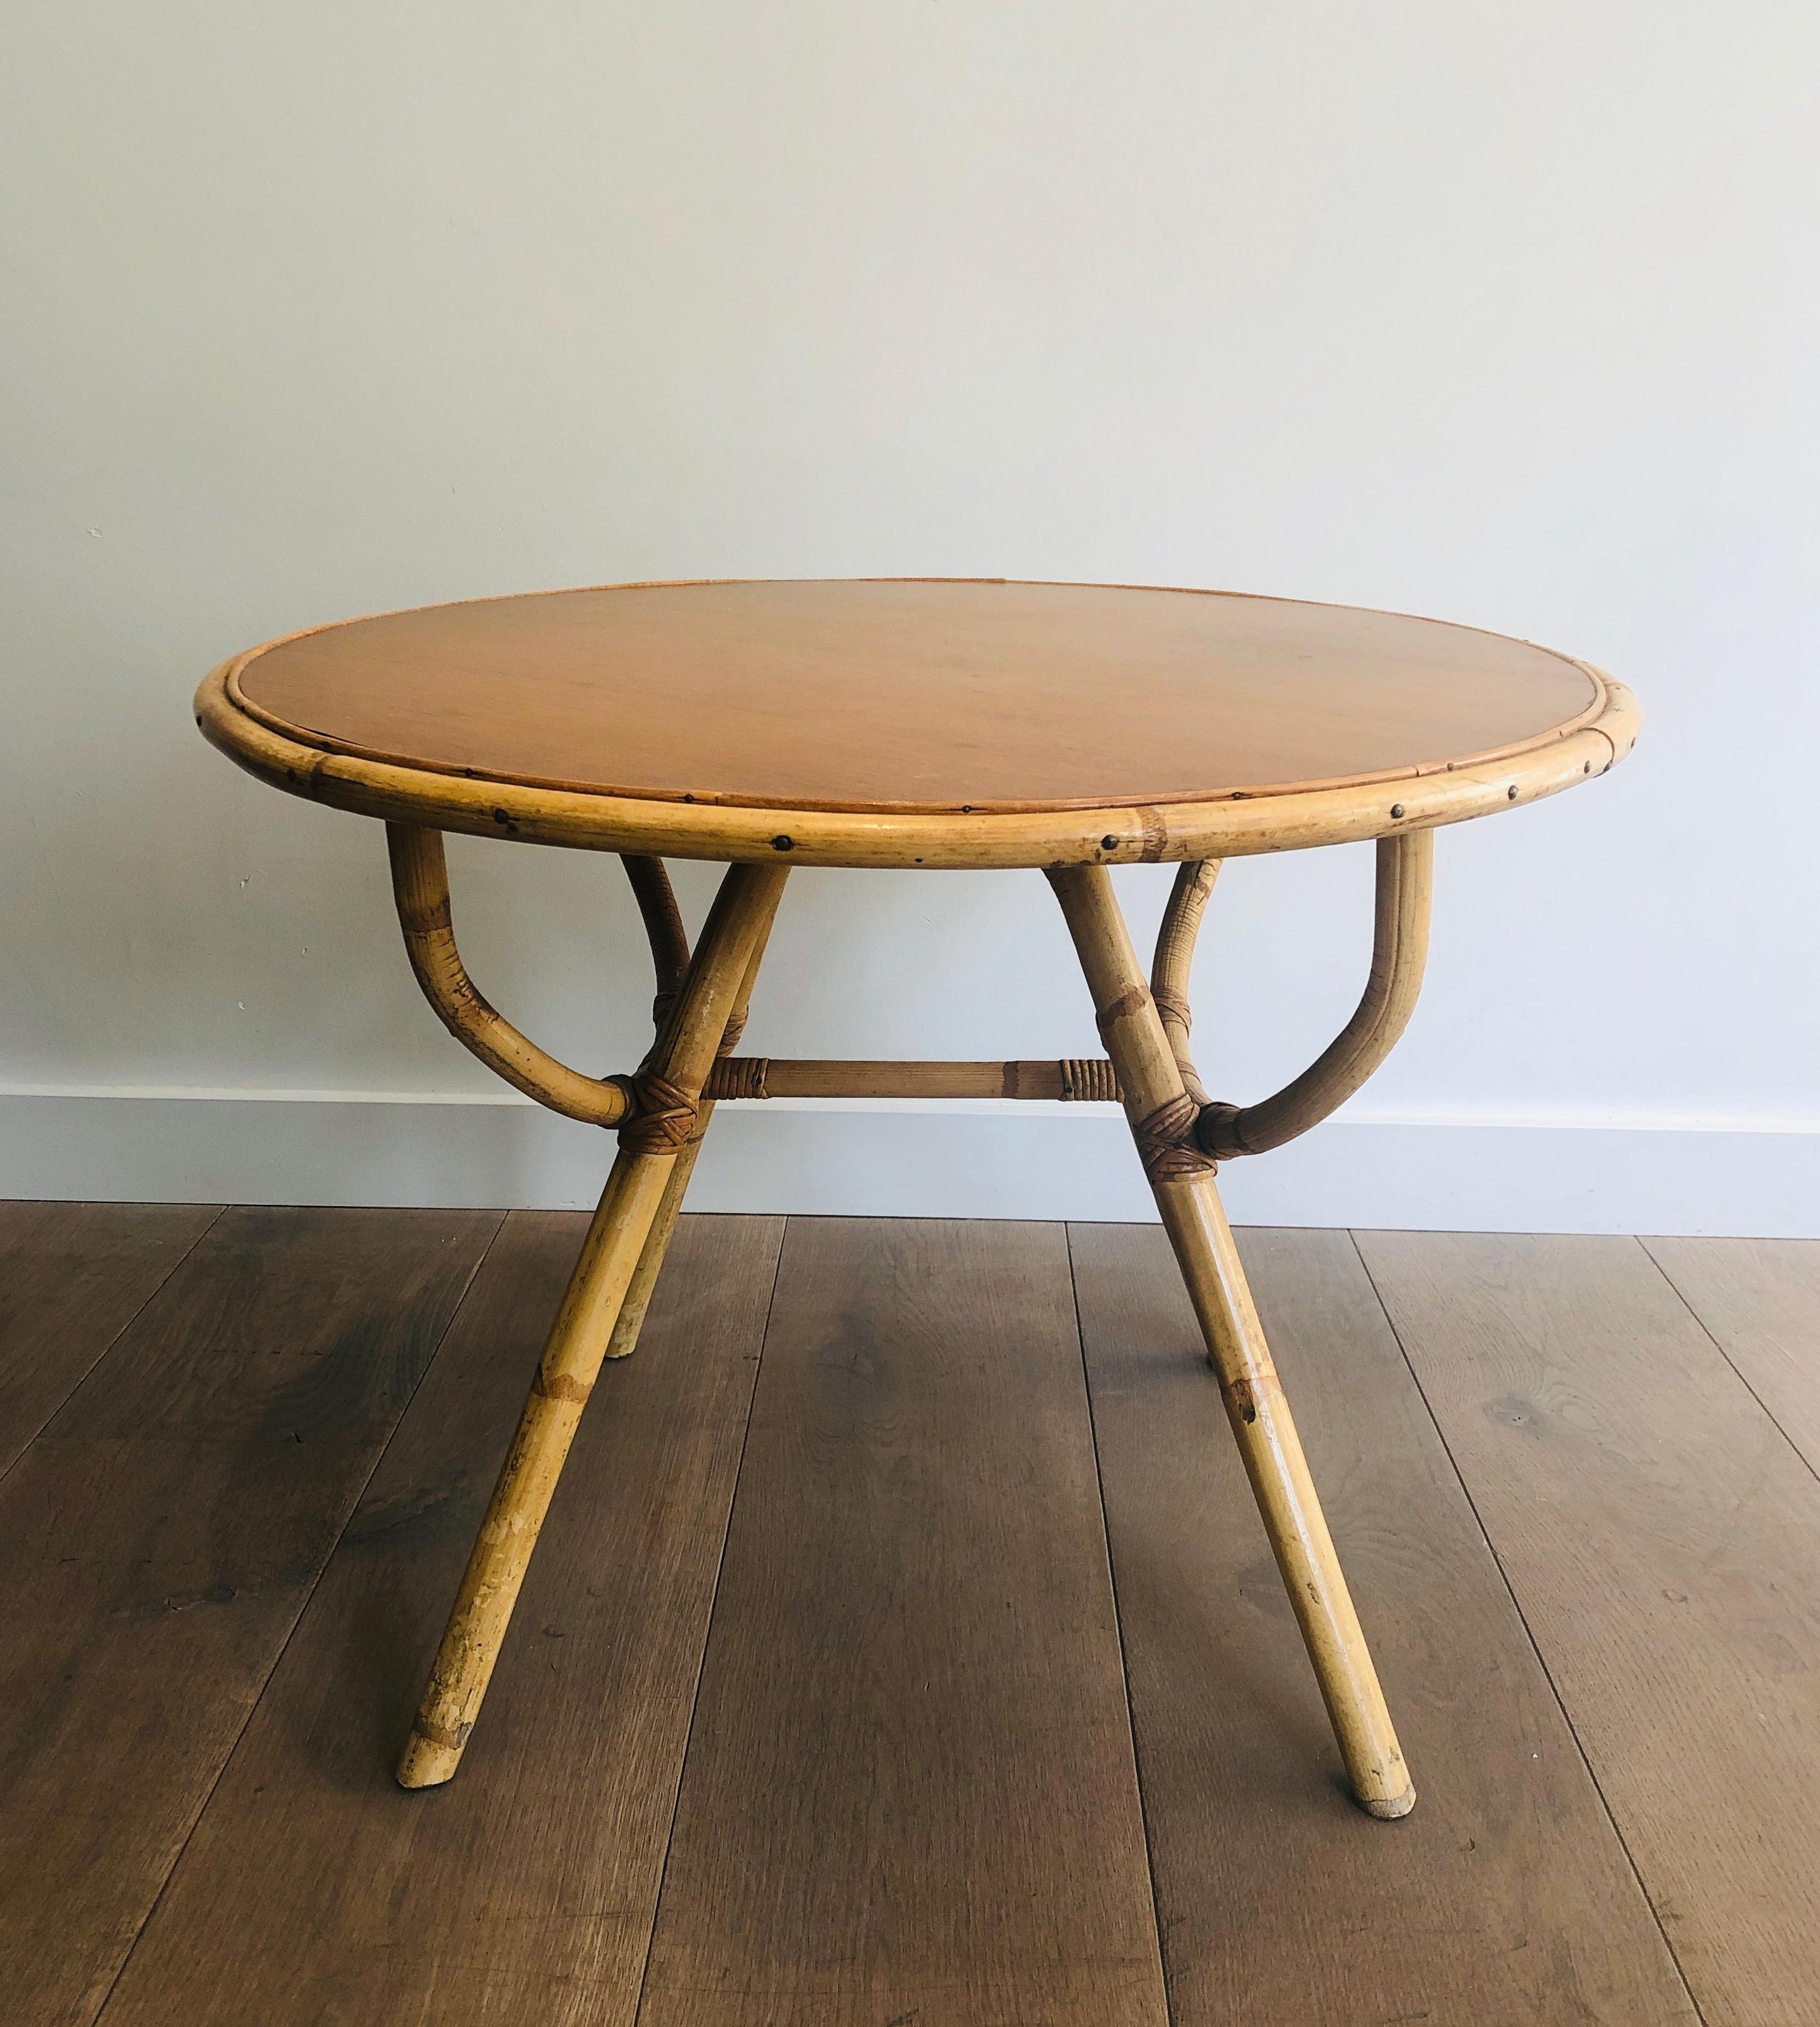 Mid-Century Modern Small Round Rattan Coffee Table with Wooden Top, French, circa 1970